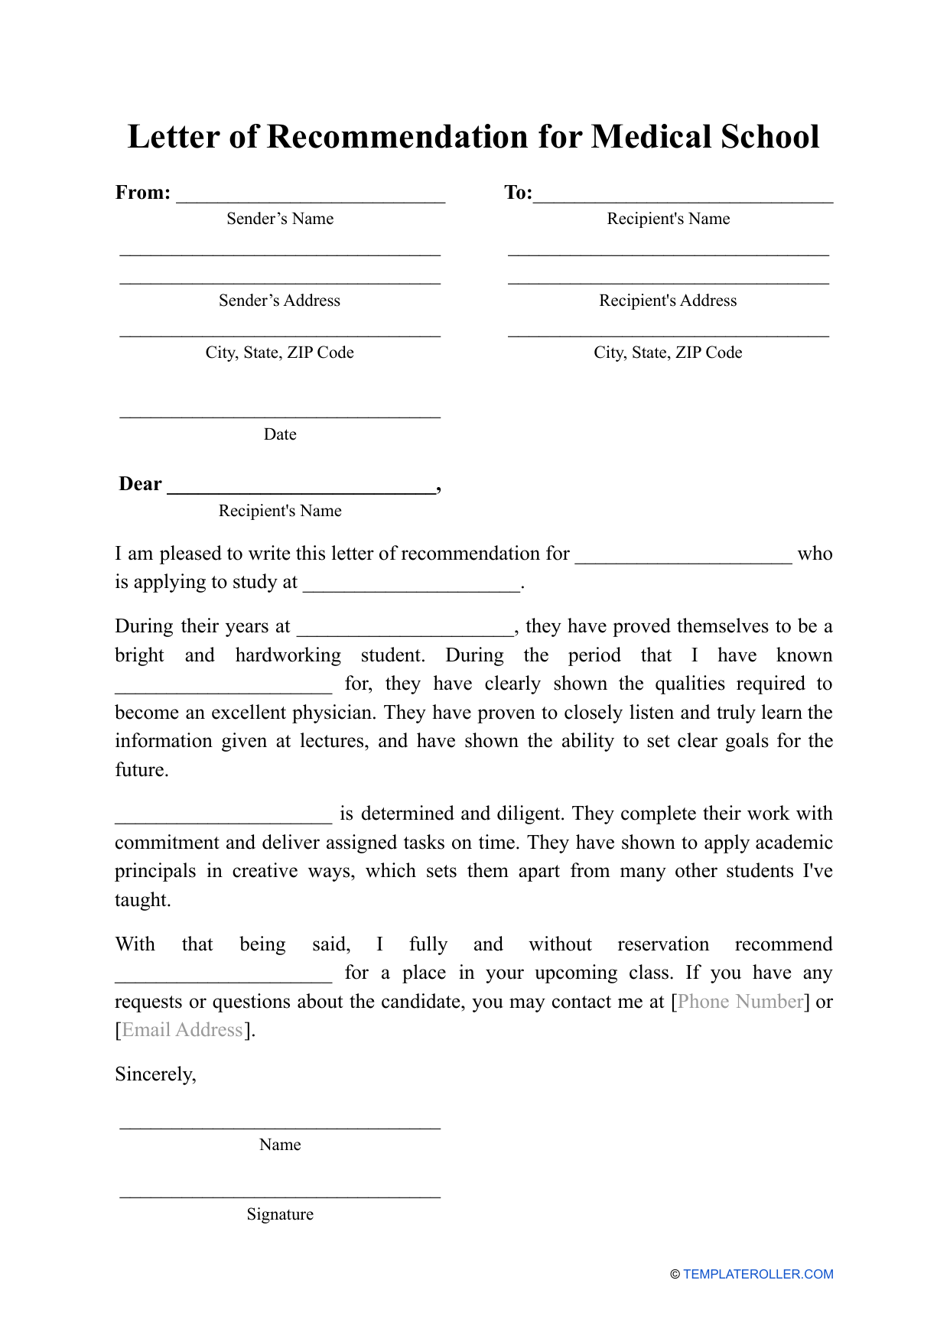 Letter of Recommendation for Medical School Template - Preview